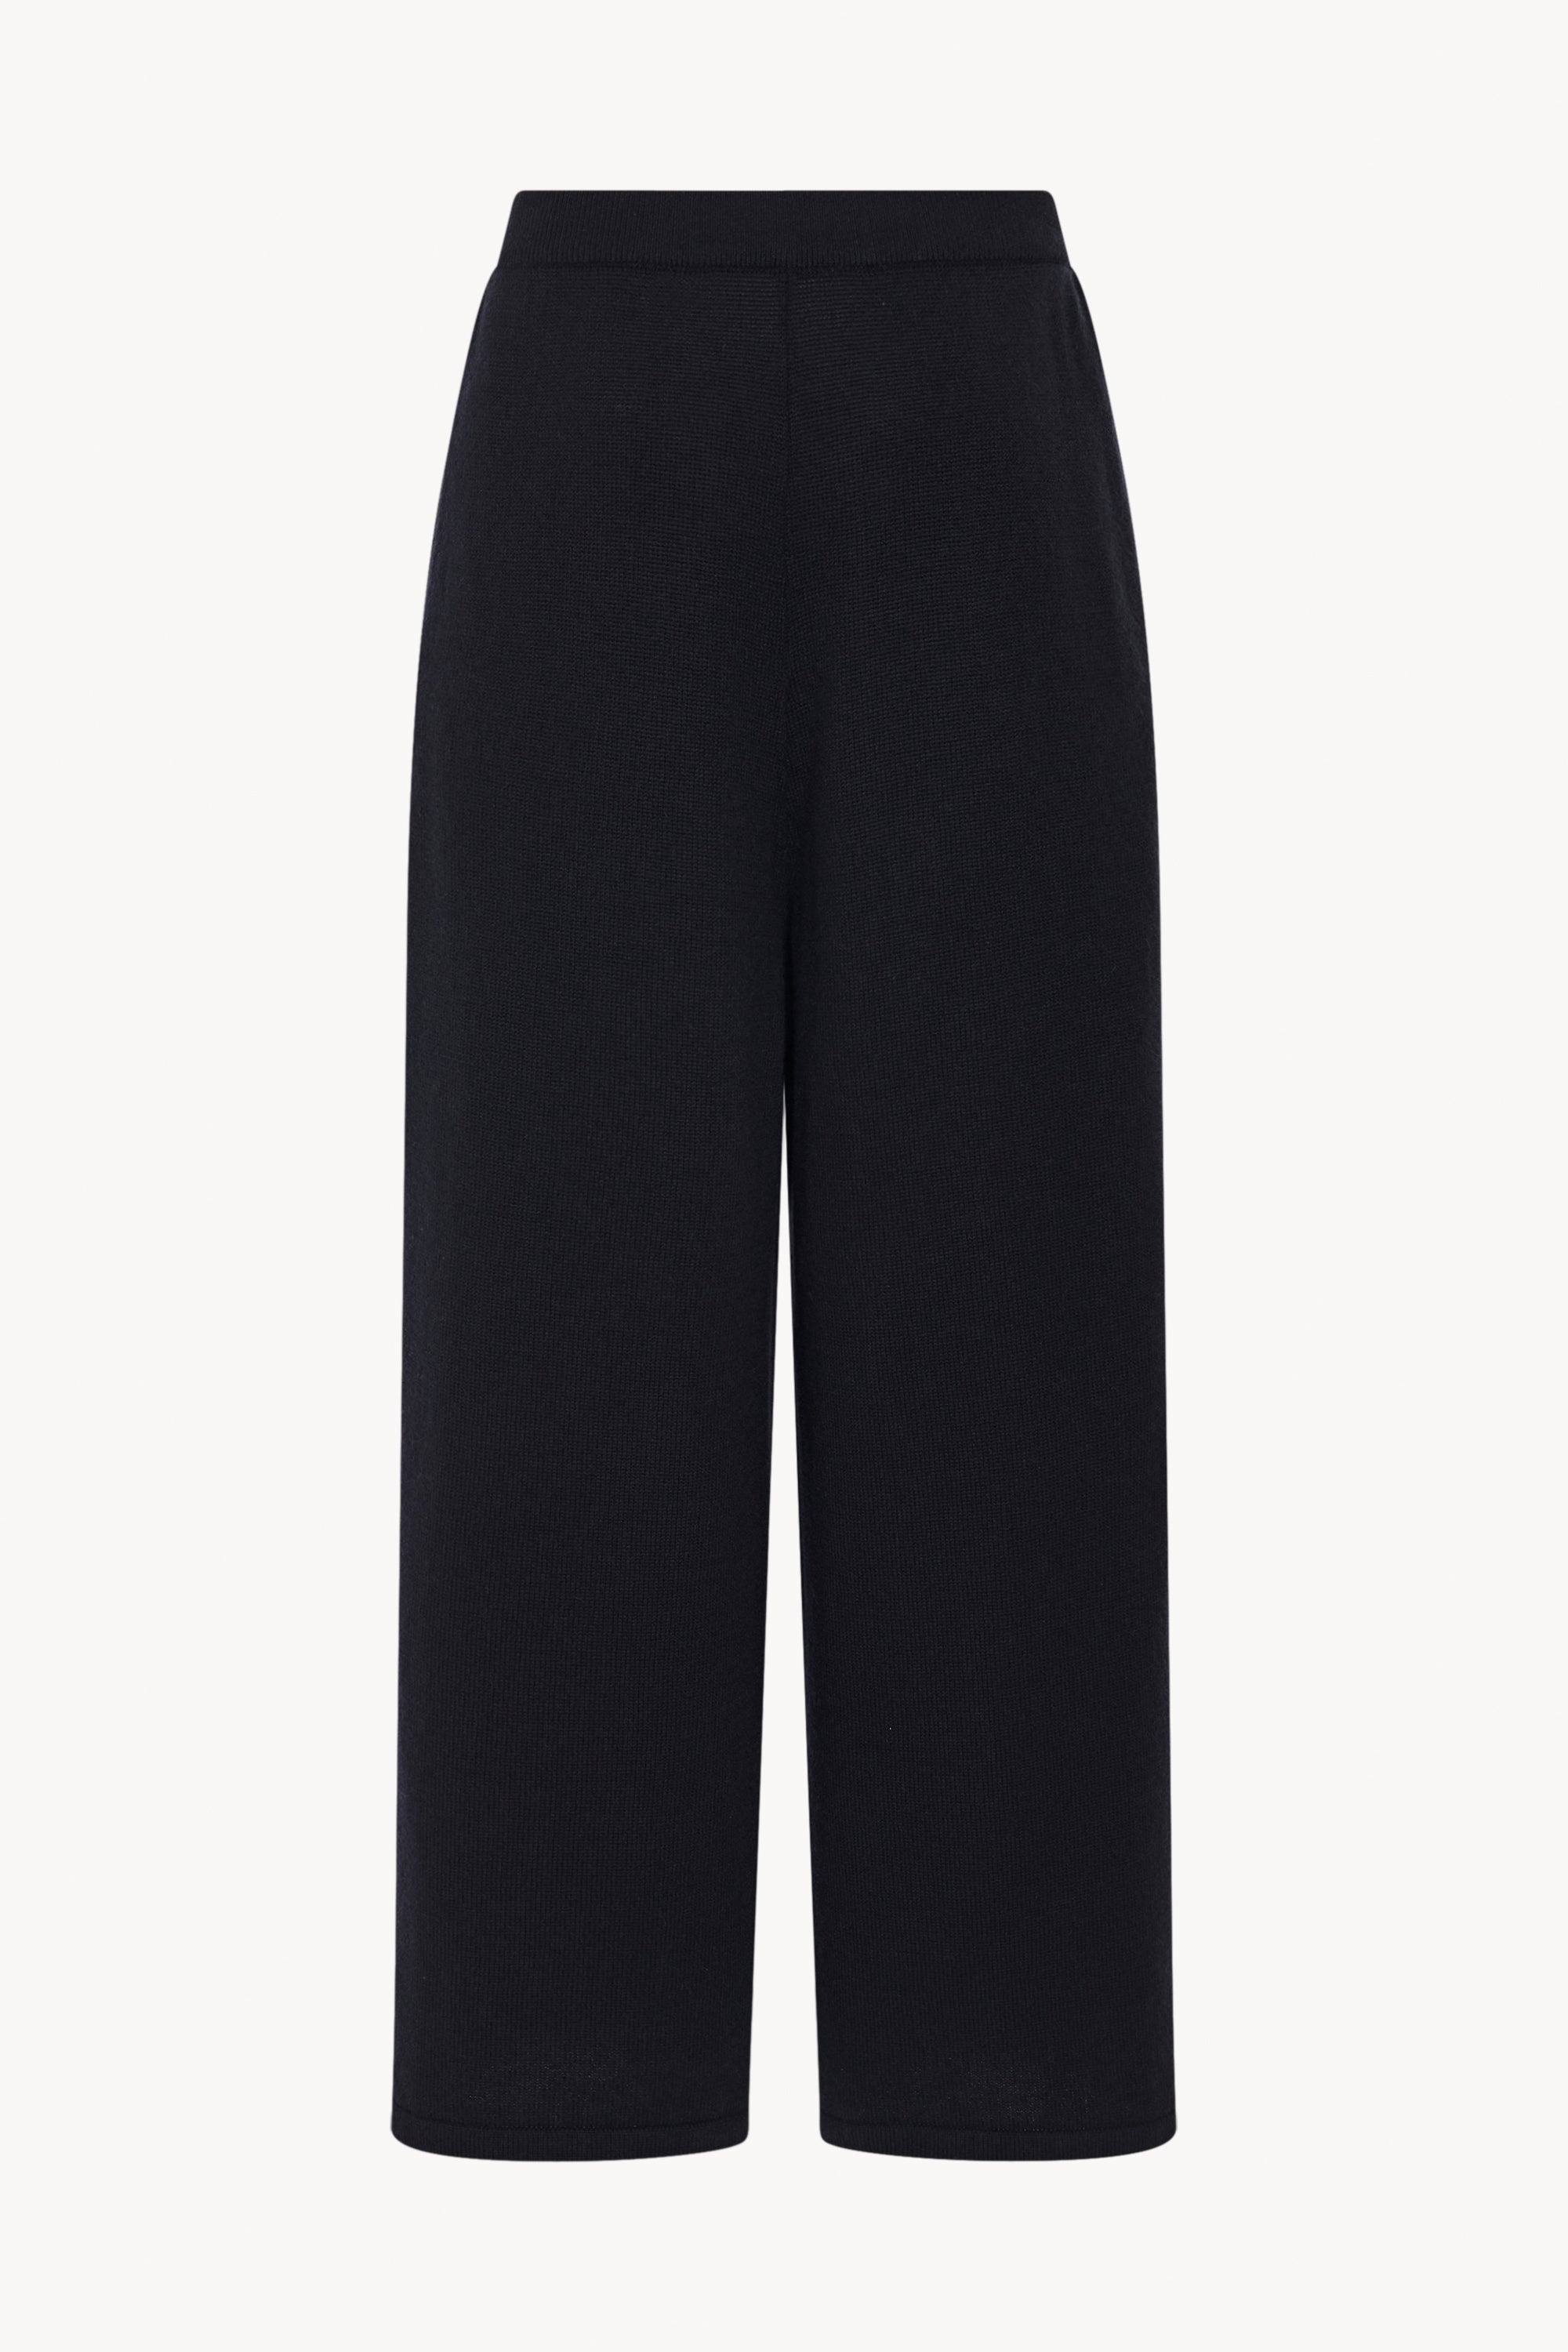 Eloisa Pants in Cashmere - 2